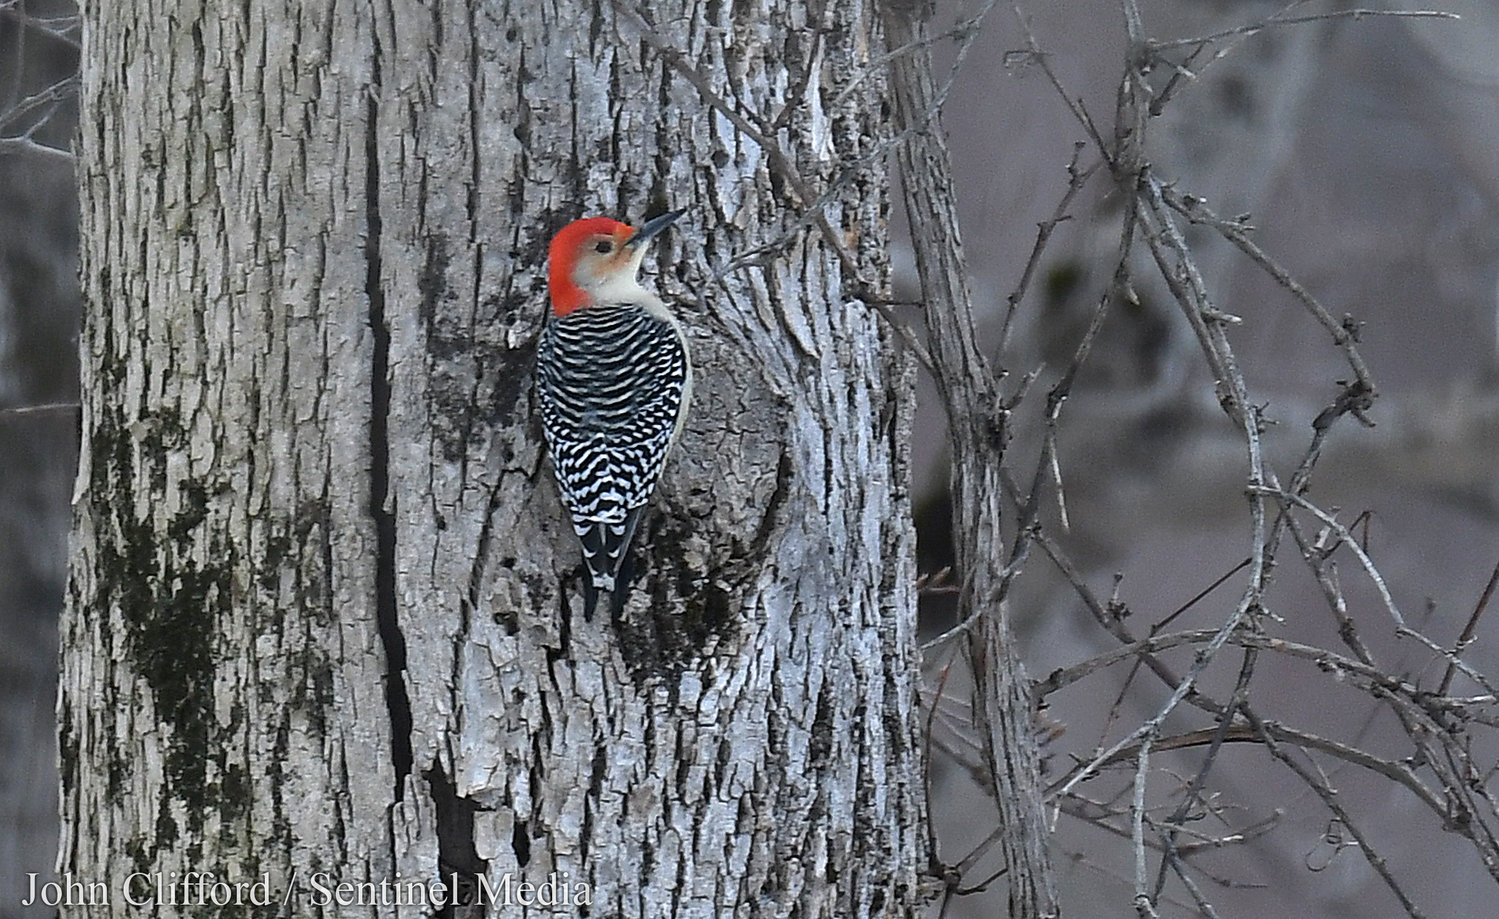 A Red-bellied Woodpecker at Delta Lake State Park Thursday, December 15, 2022.